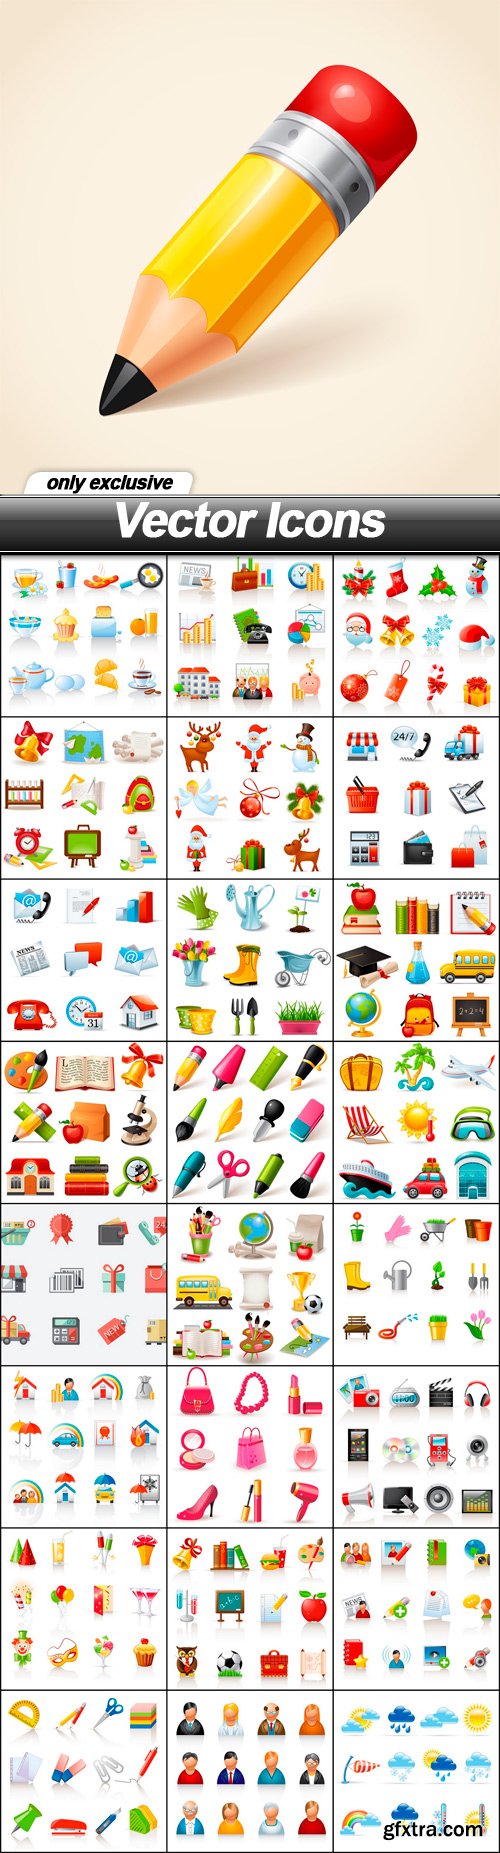 Vector Icons - 25 EPS